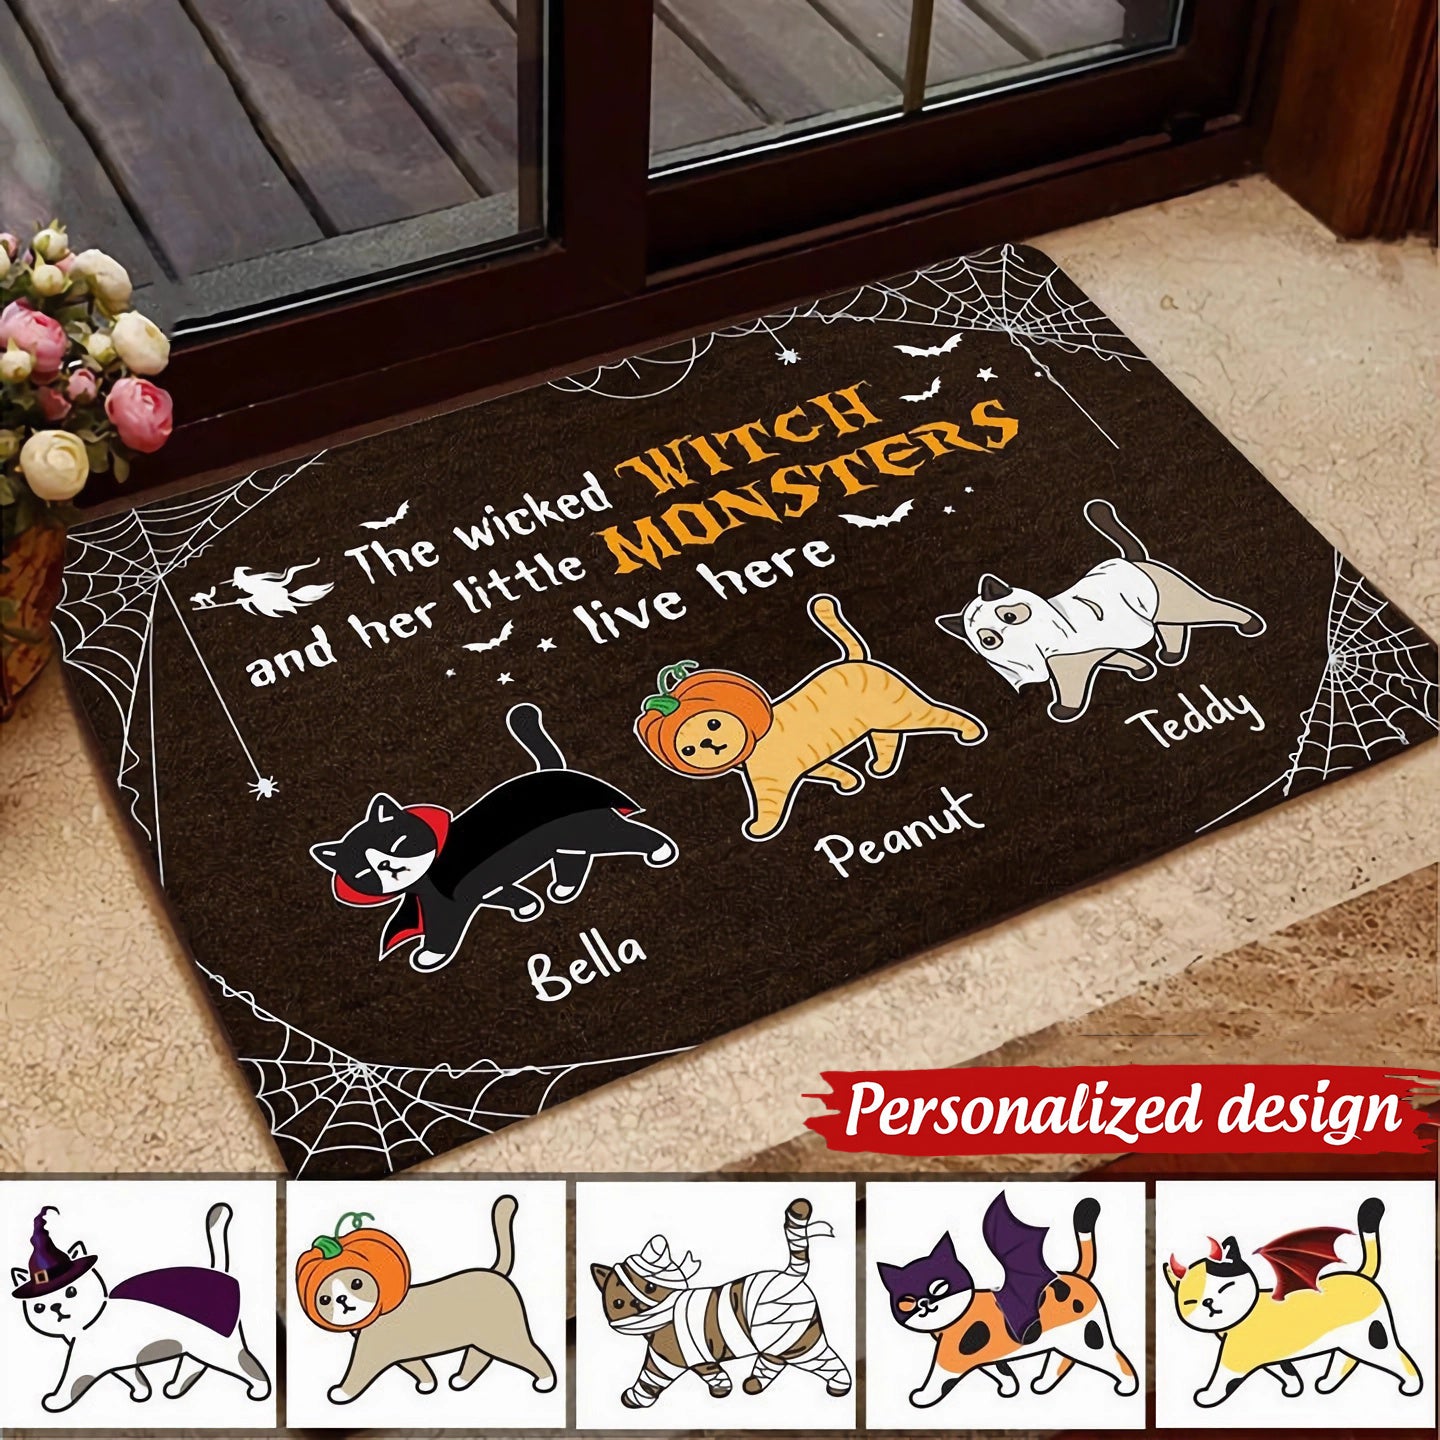 Wicked Witch And Monster Cats Live Here Halloween Personalized Doormat